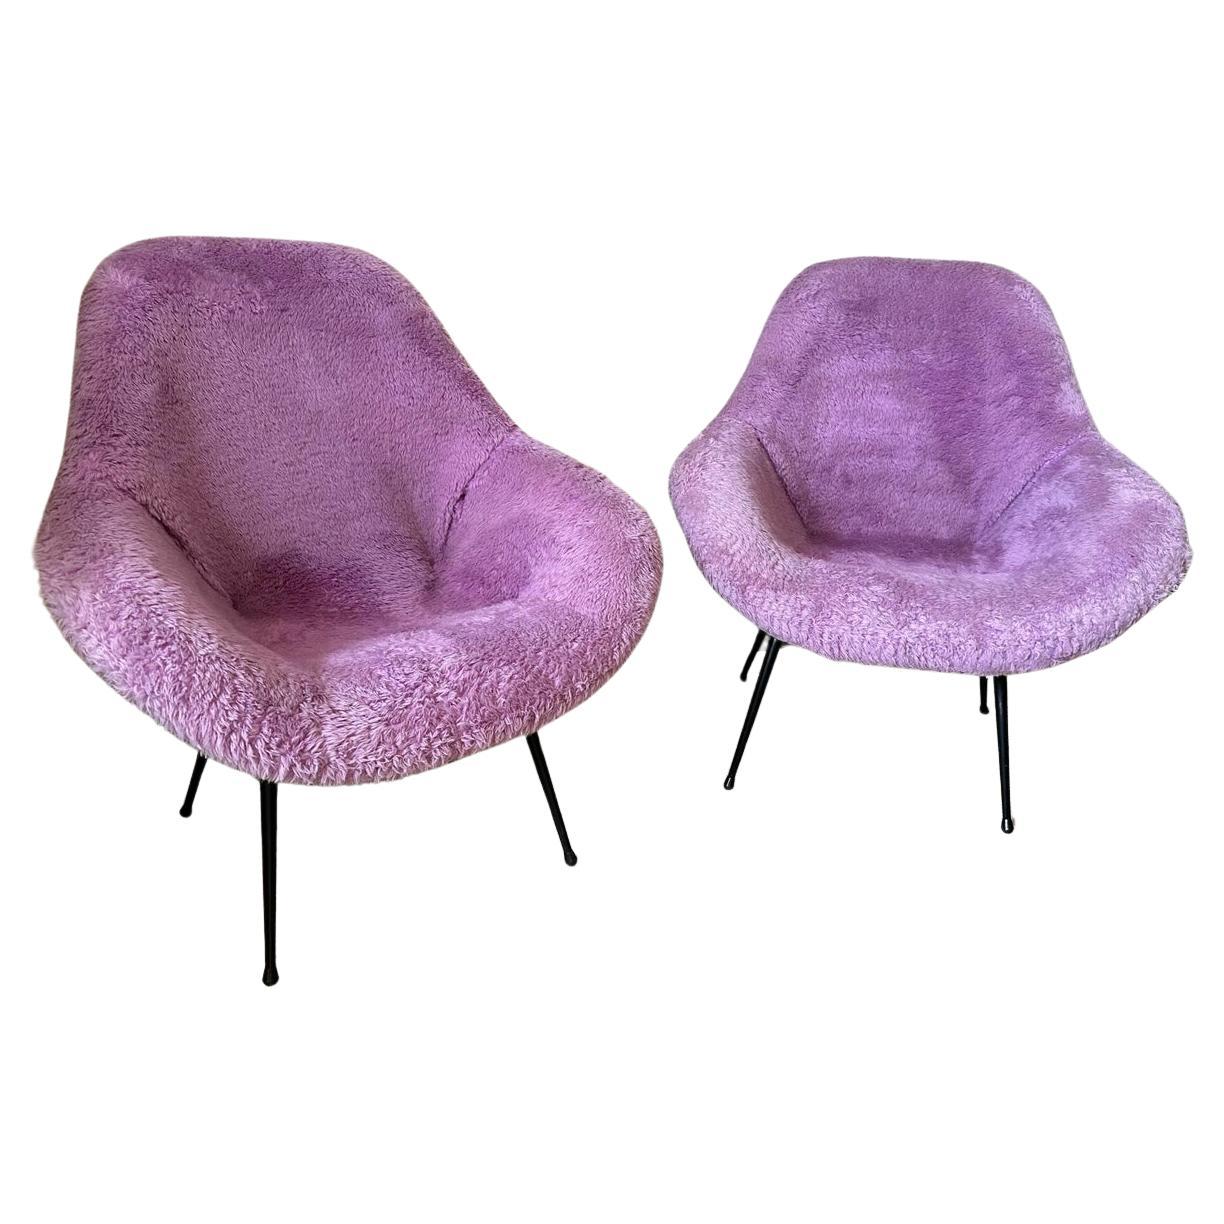 20th century French Vintage Fluffy Purple Fabric Armchair, 1950s For Sale